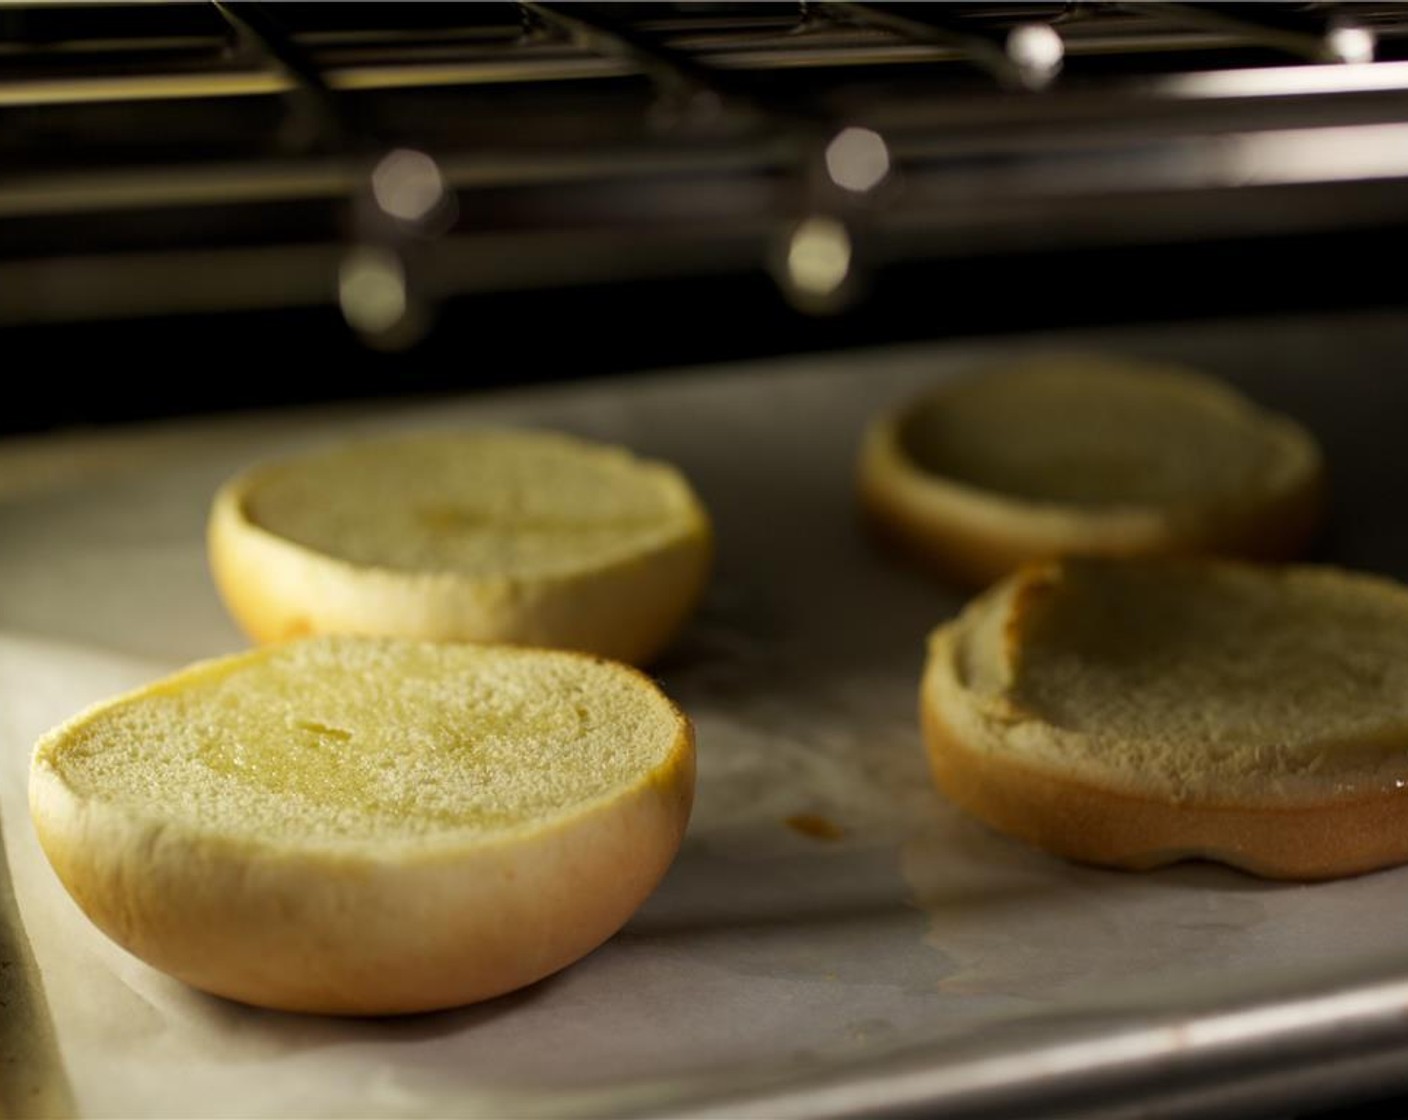 step 9 Open the Potato Buns (2) and place on a sheet pan and heat in the oven for 2 minutes. Remove from oven and keep warm for plating.